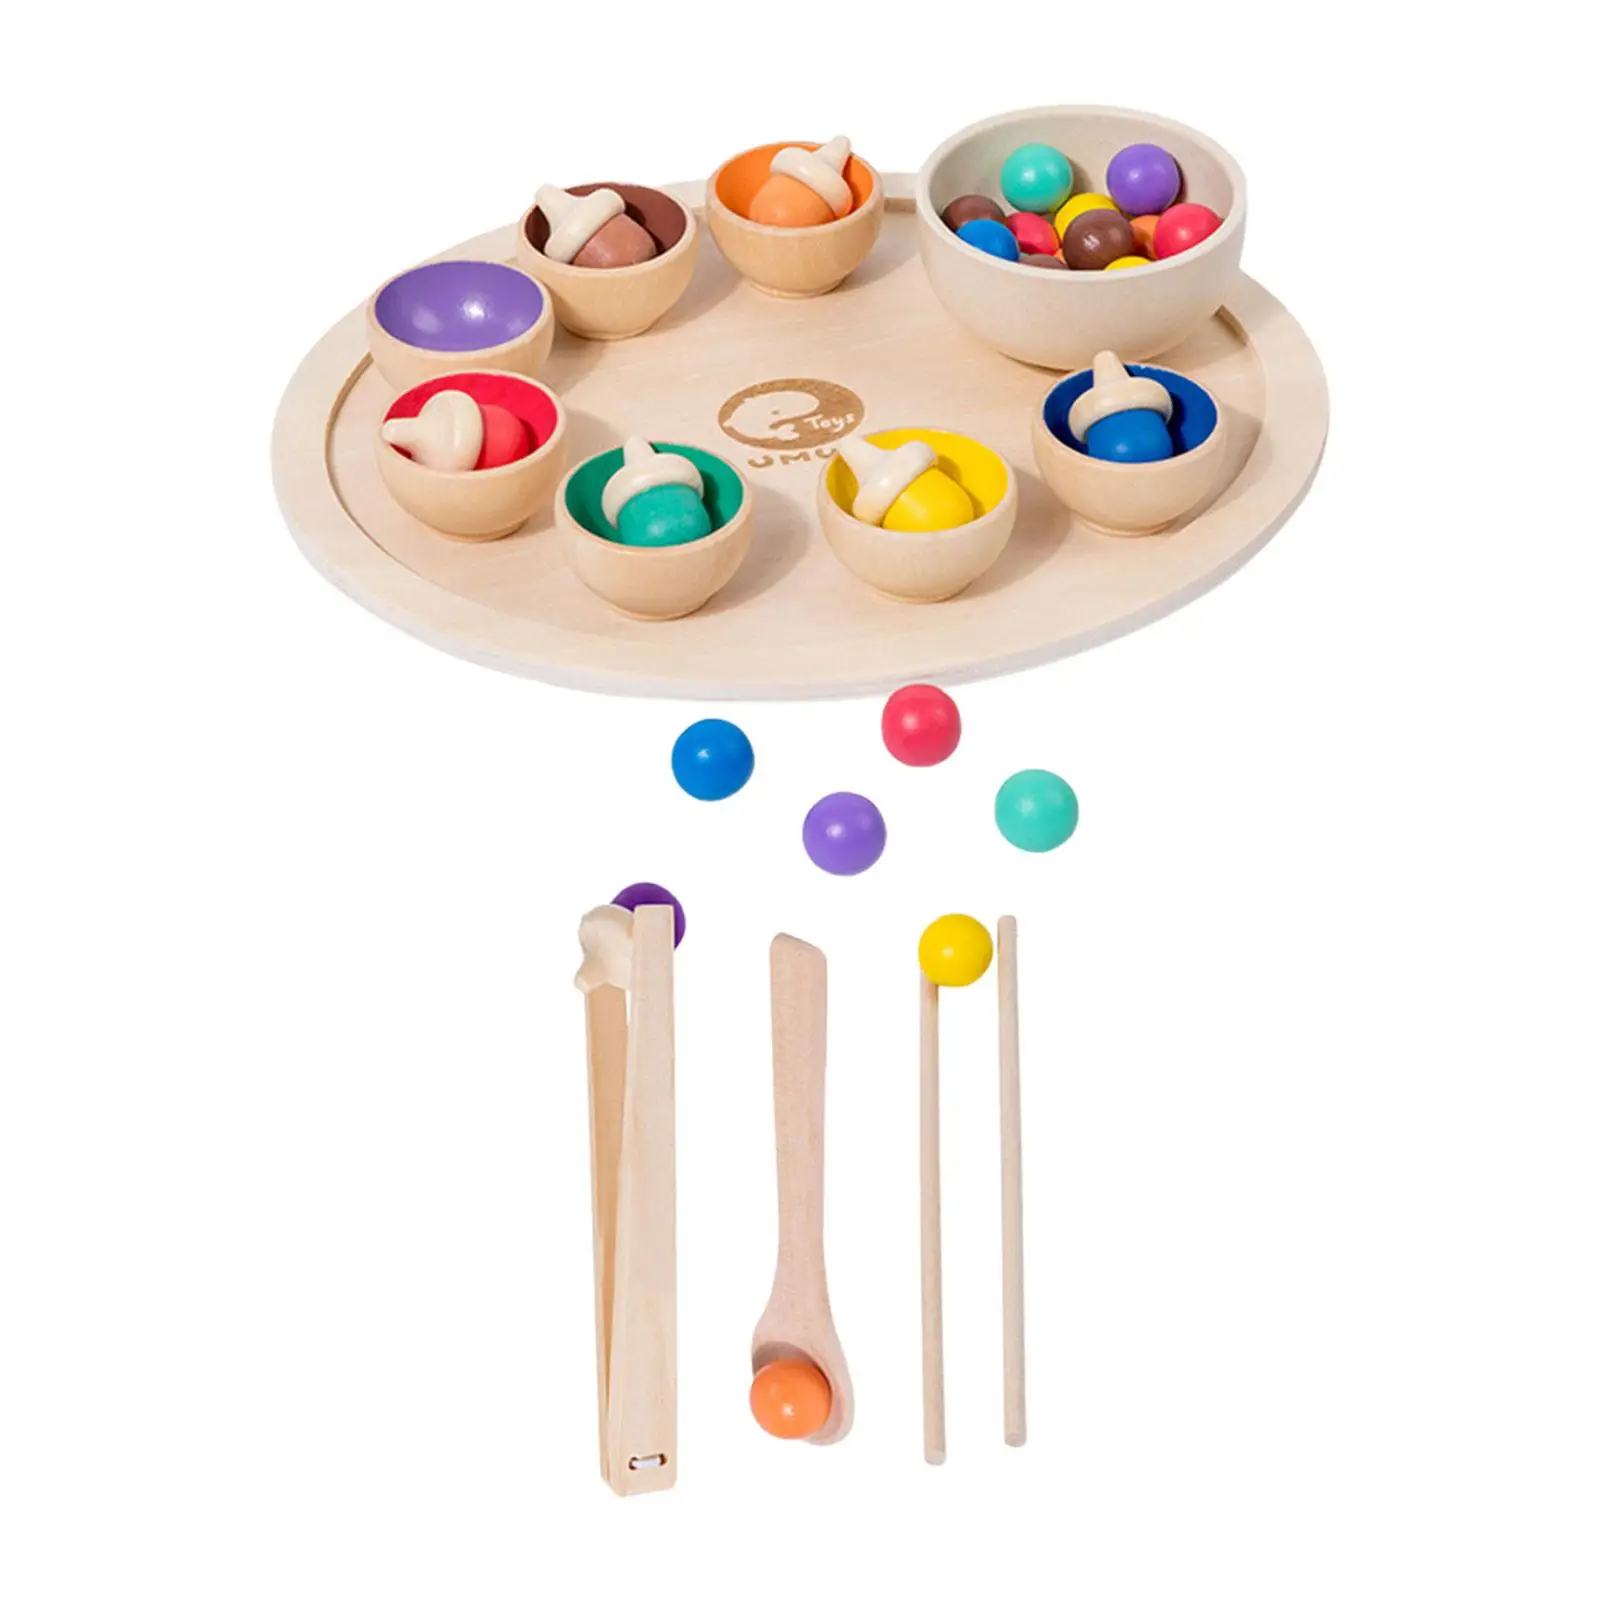 Montessori Bowls Toy Balls Matching Matching and Counting Toy Fine Motor Development Game Wooden Rainbow Toys for Toddlers Baby